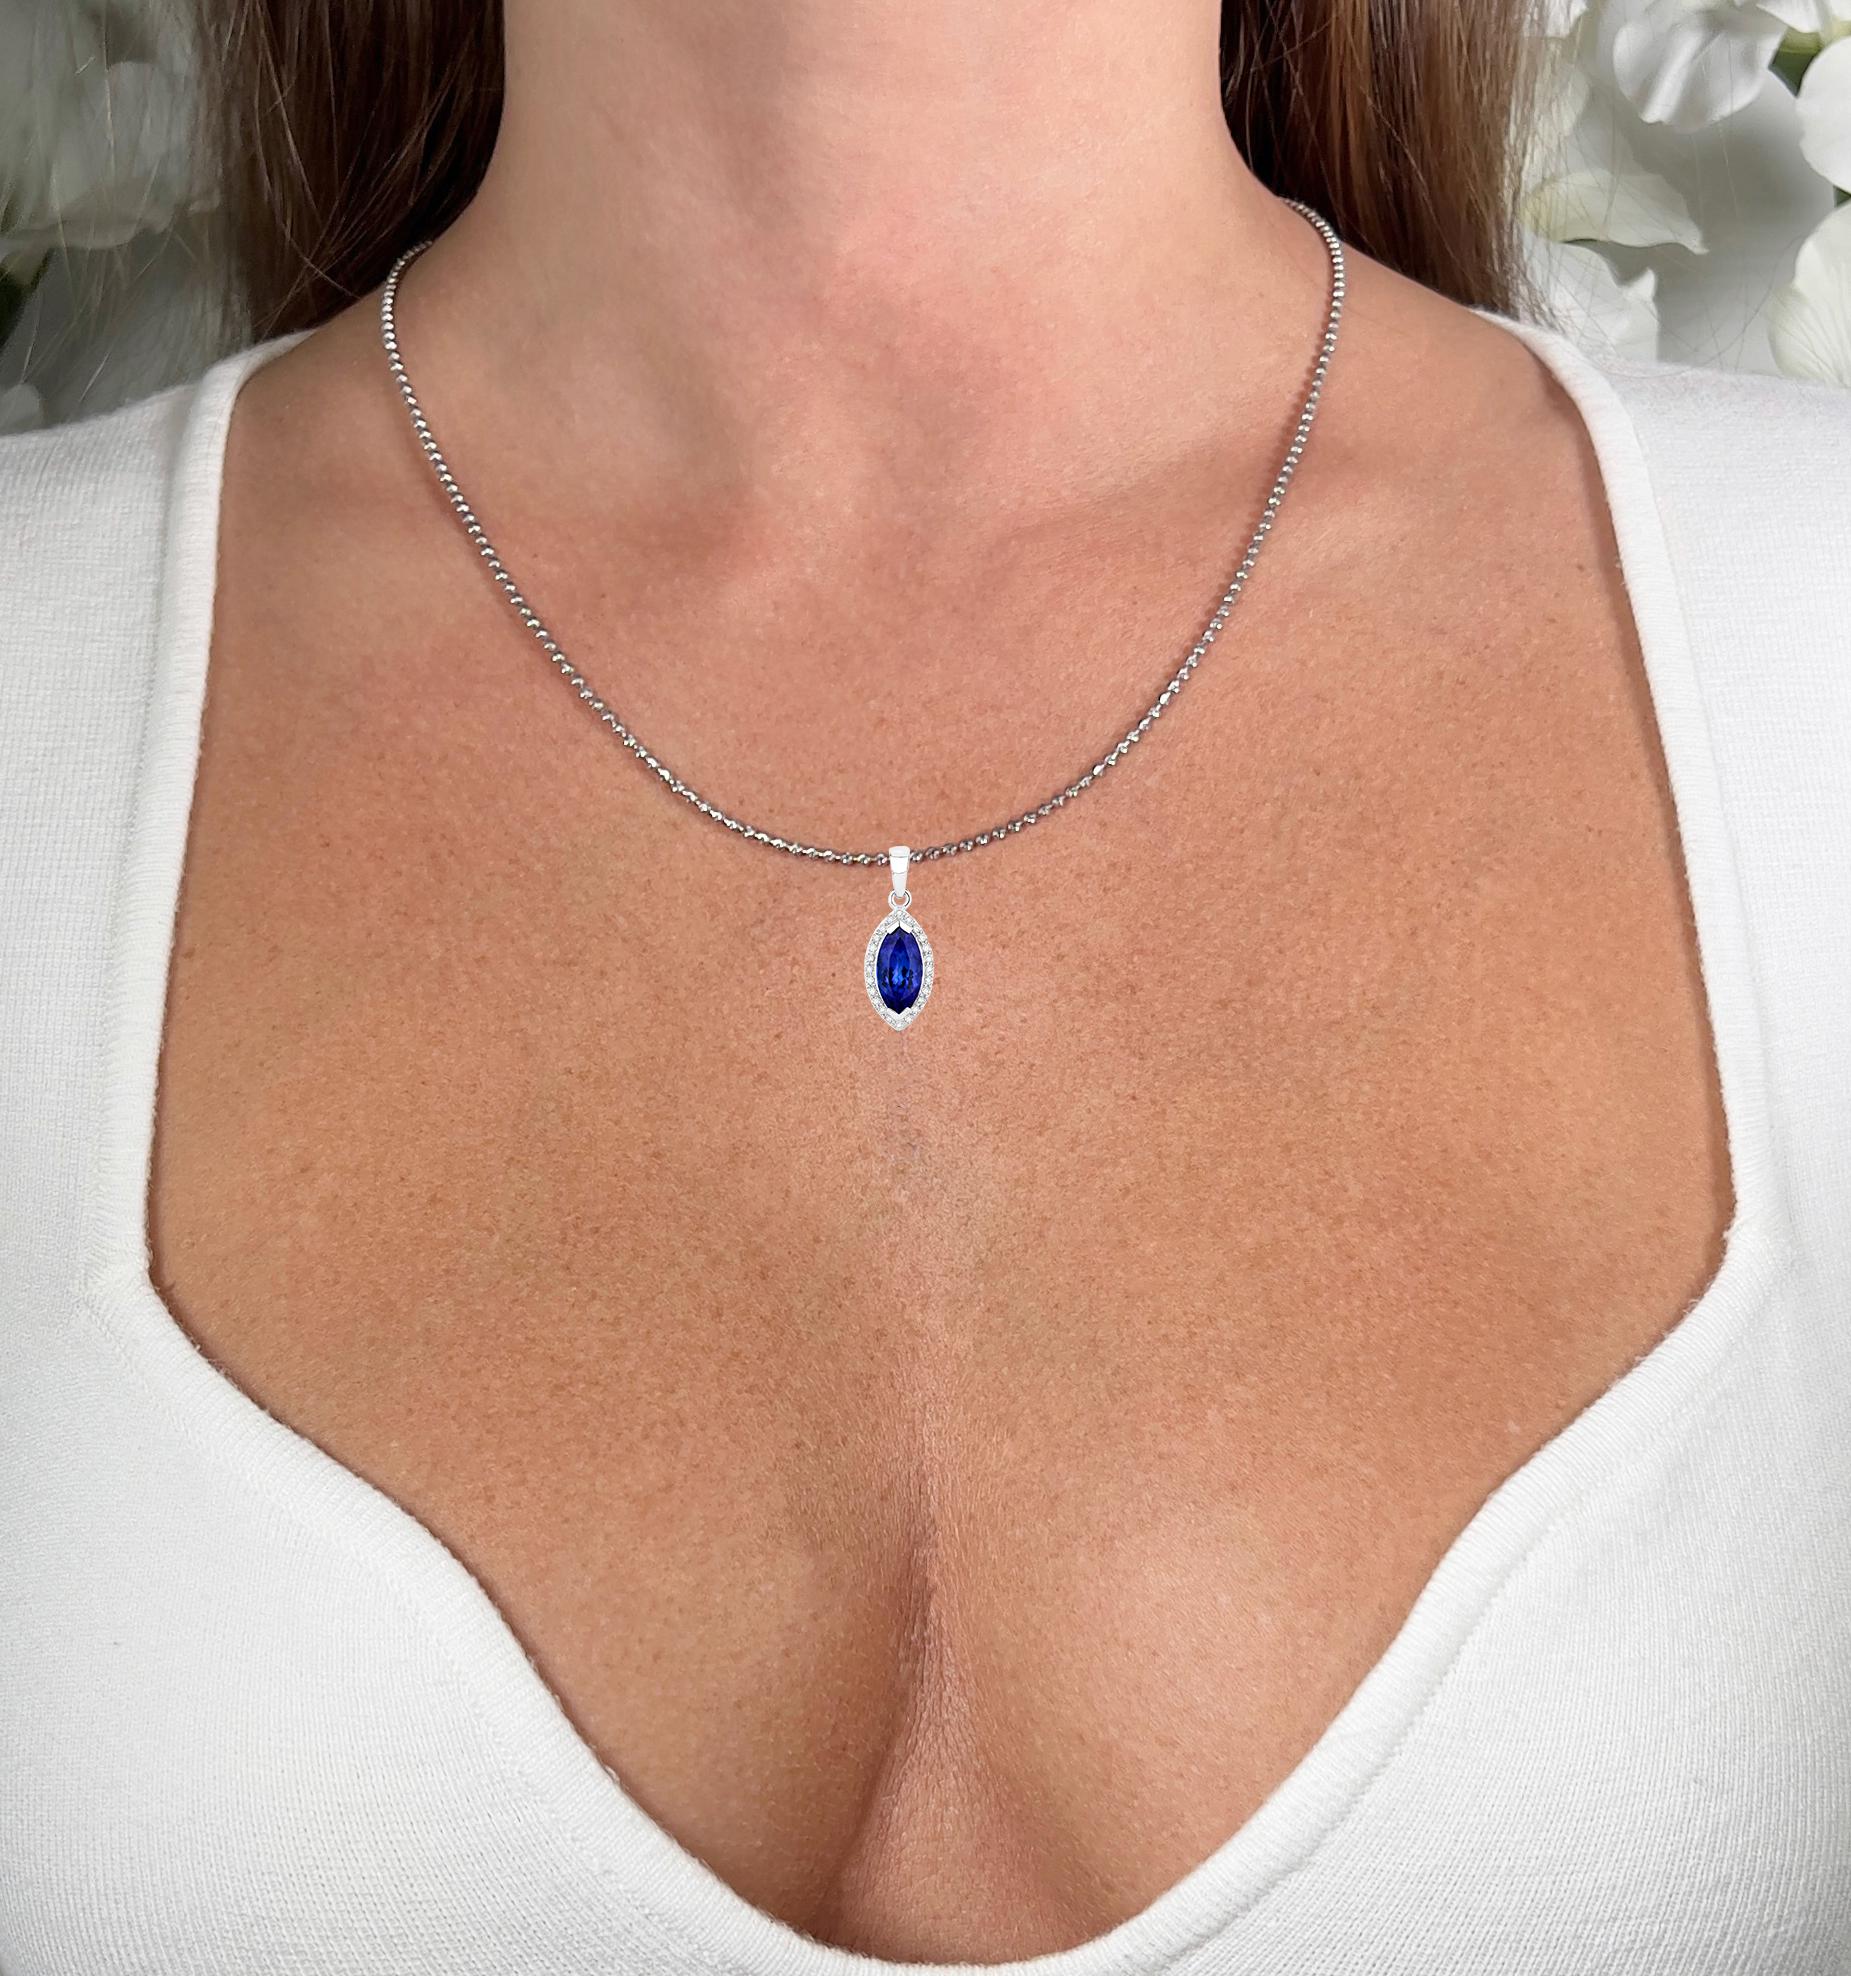 It comes with the Gemological Appraisal by GIA GG/AJP
All Gemstones are Natural
Marquise Tanzanite = 1.88 Carat
24 Round Diamonds = 0.19 Carats
Metal: 14K White Gold
Pendant Dimensions: 24 x 9 mm
